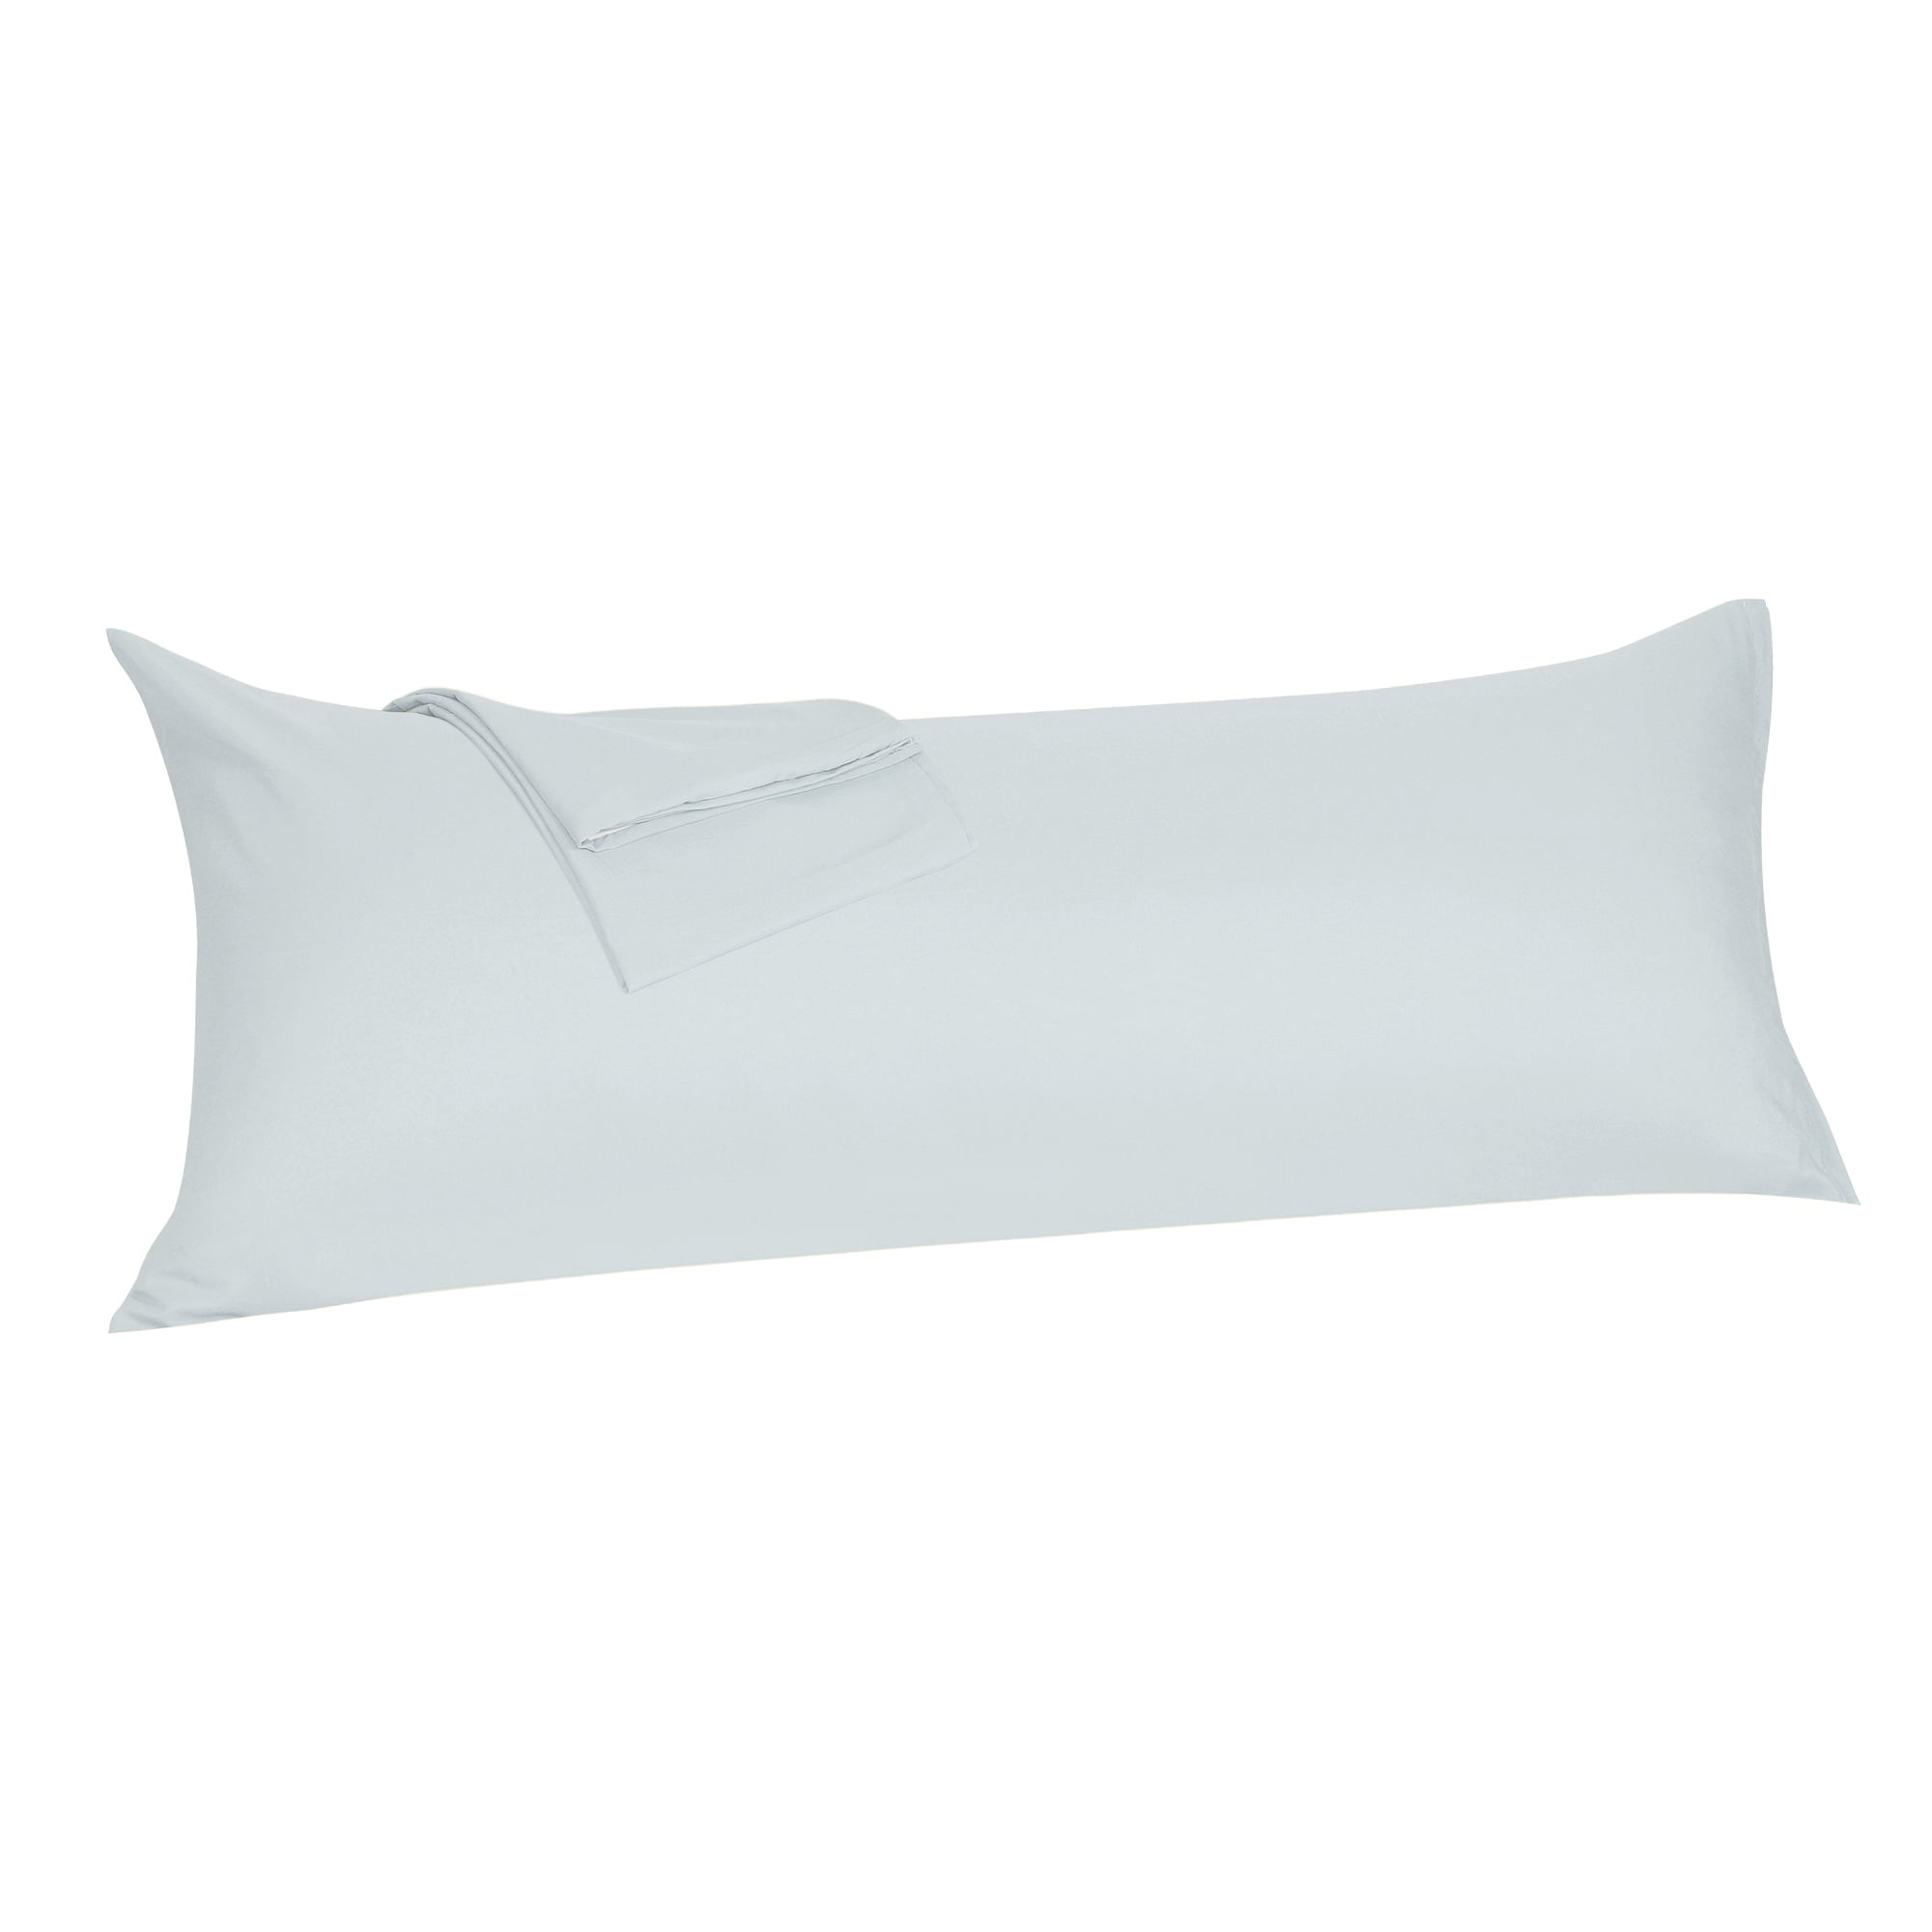 200 Thread Count Single Oxford Style Pillow Case In White 51cm x 76cm 